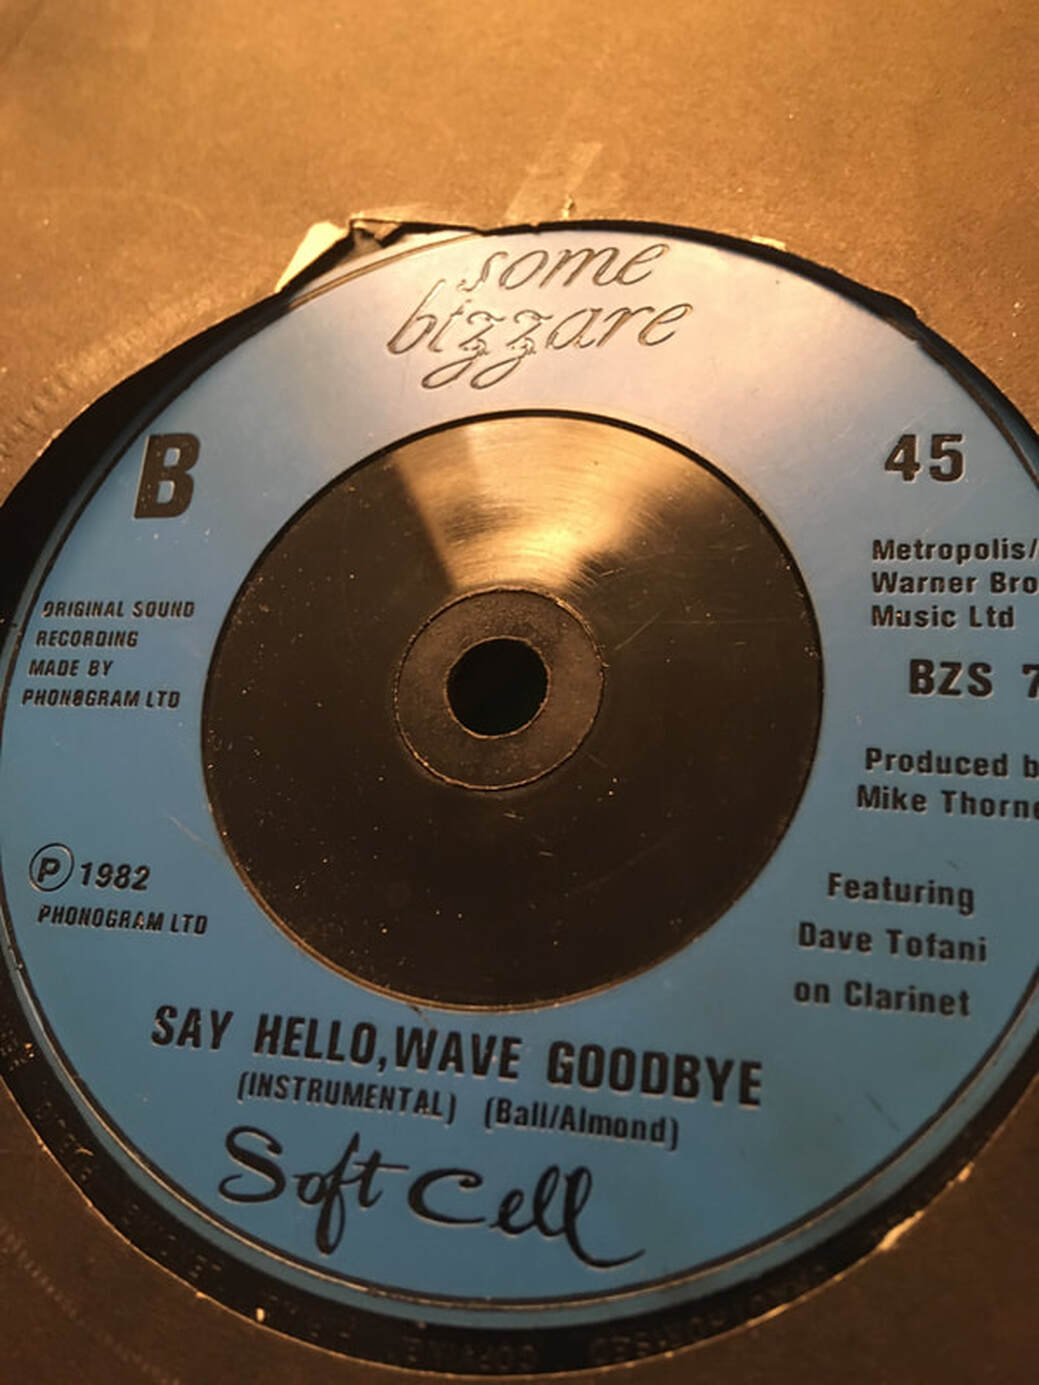 Hello oh oh oh i just came to say hello Objects Of Desire The 12 Say Hello Wave Goodbye Soft Cell Single Feat Dave Tofani S Gorgeous Clarinet Solo Phacemag